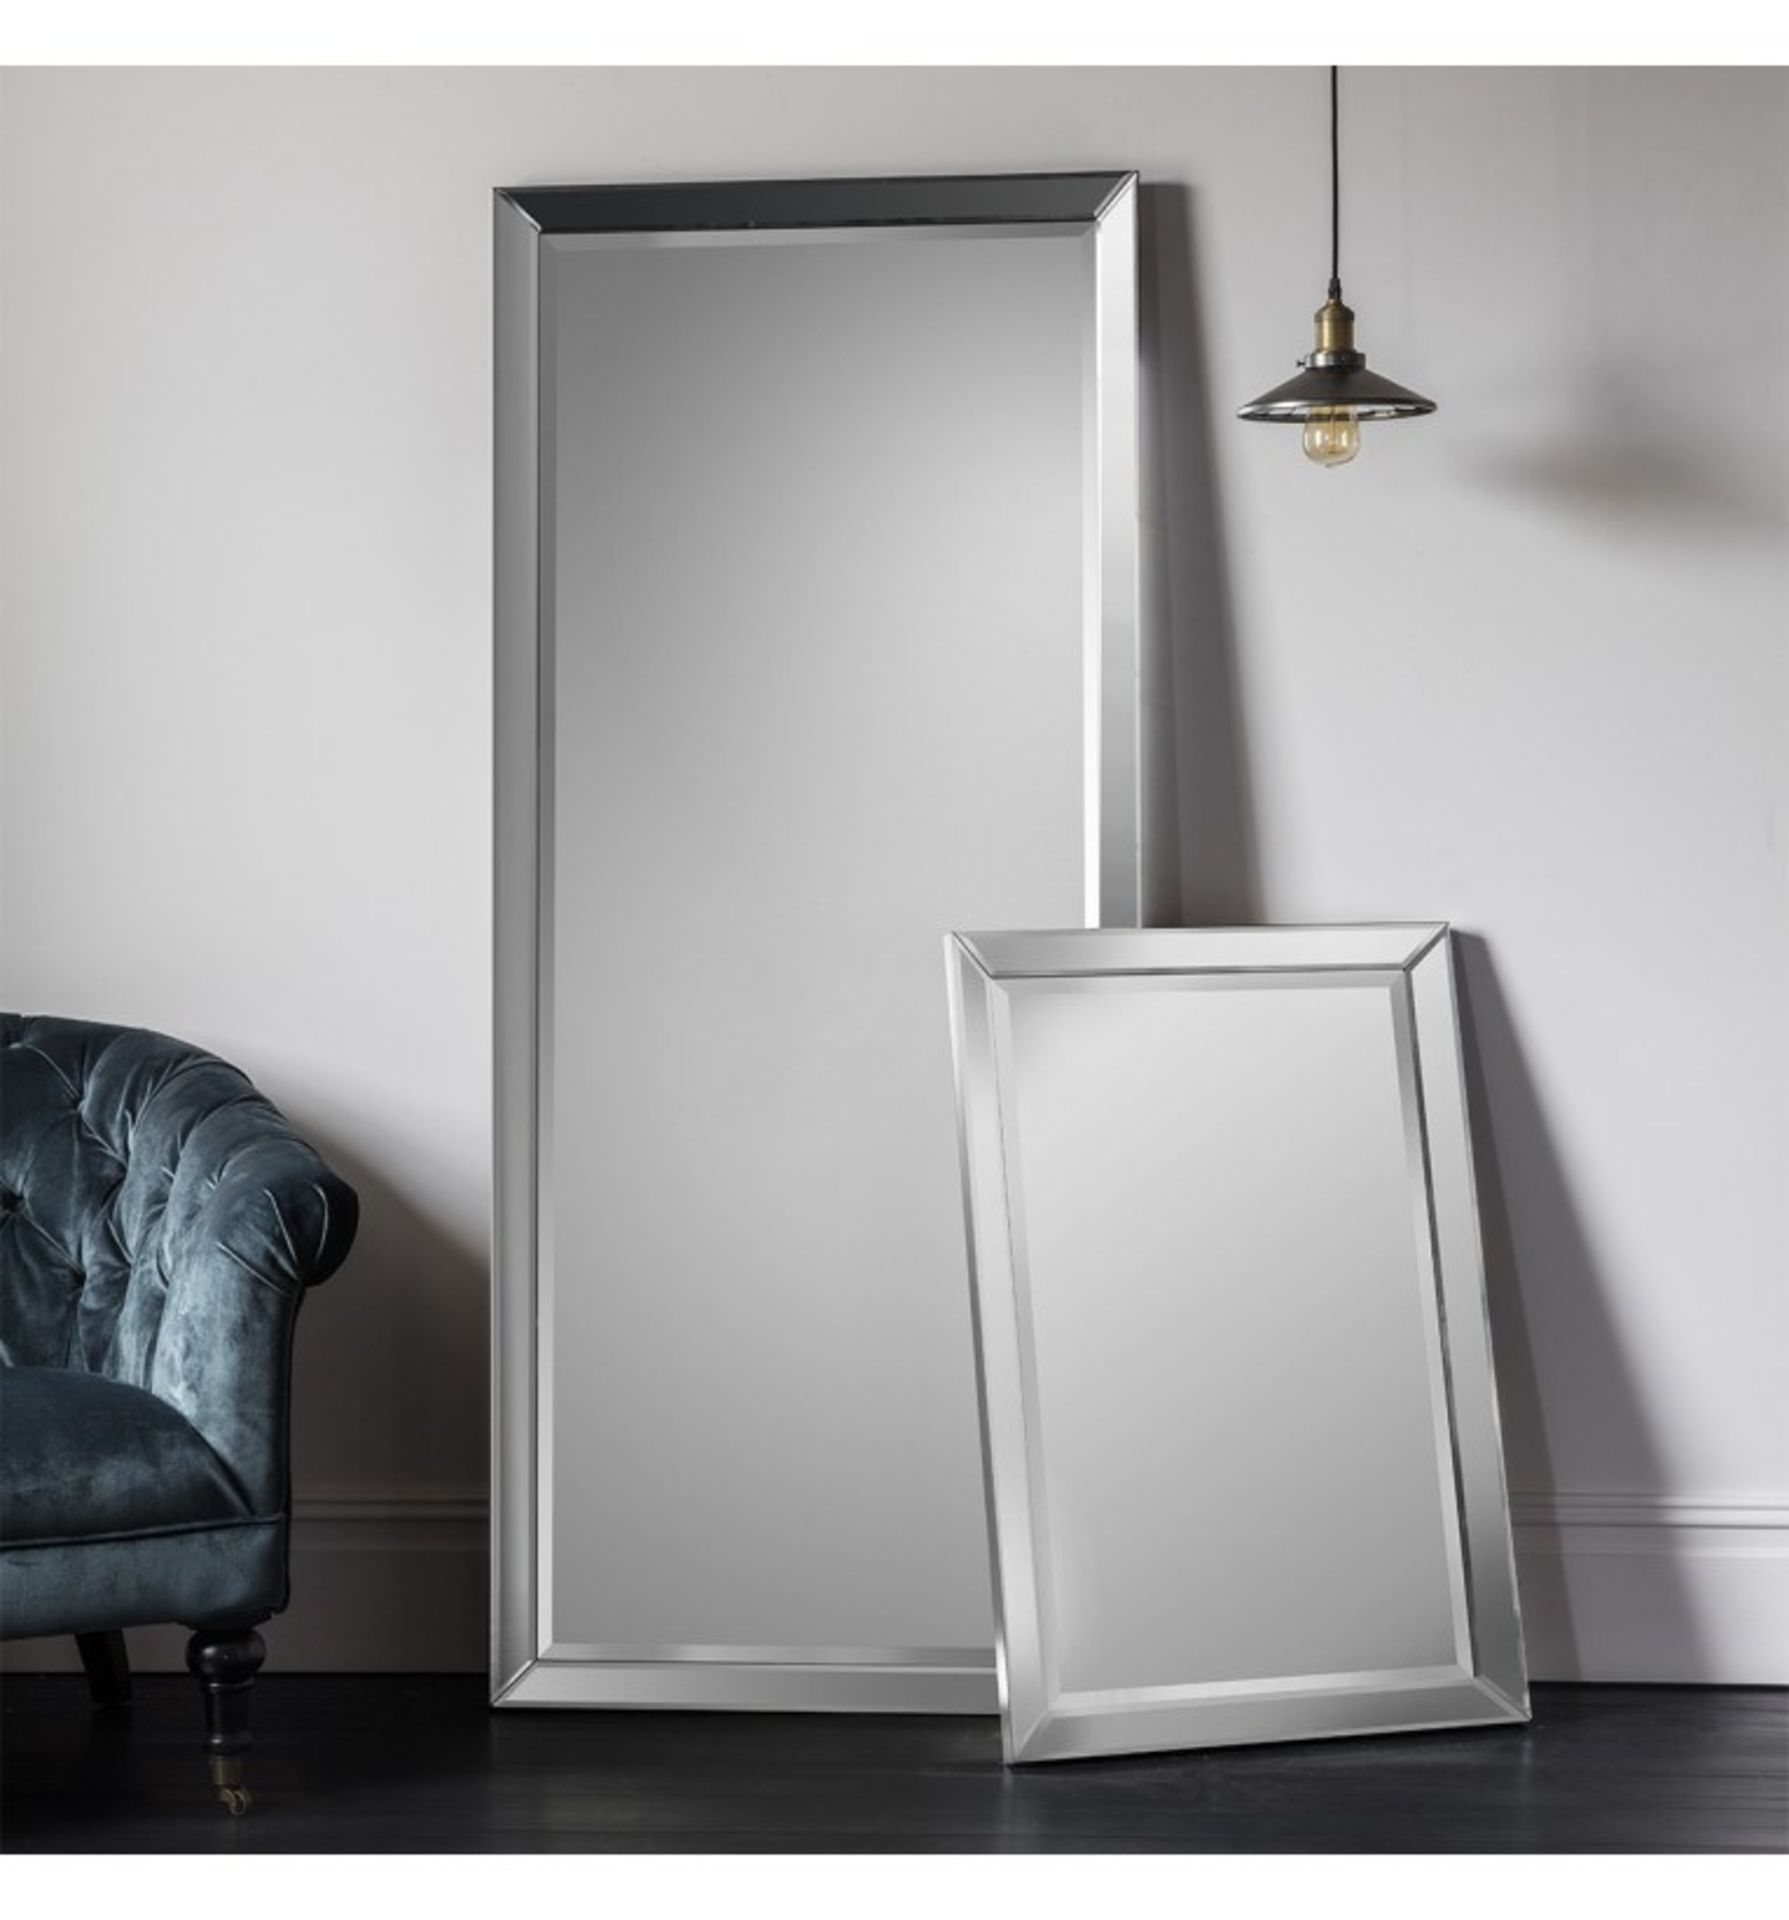 Luna Rectangle Versatile angled all bevelled mirror frame at a scale to suit any interior 915 x